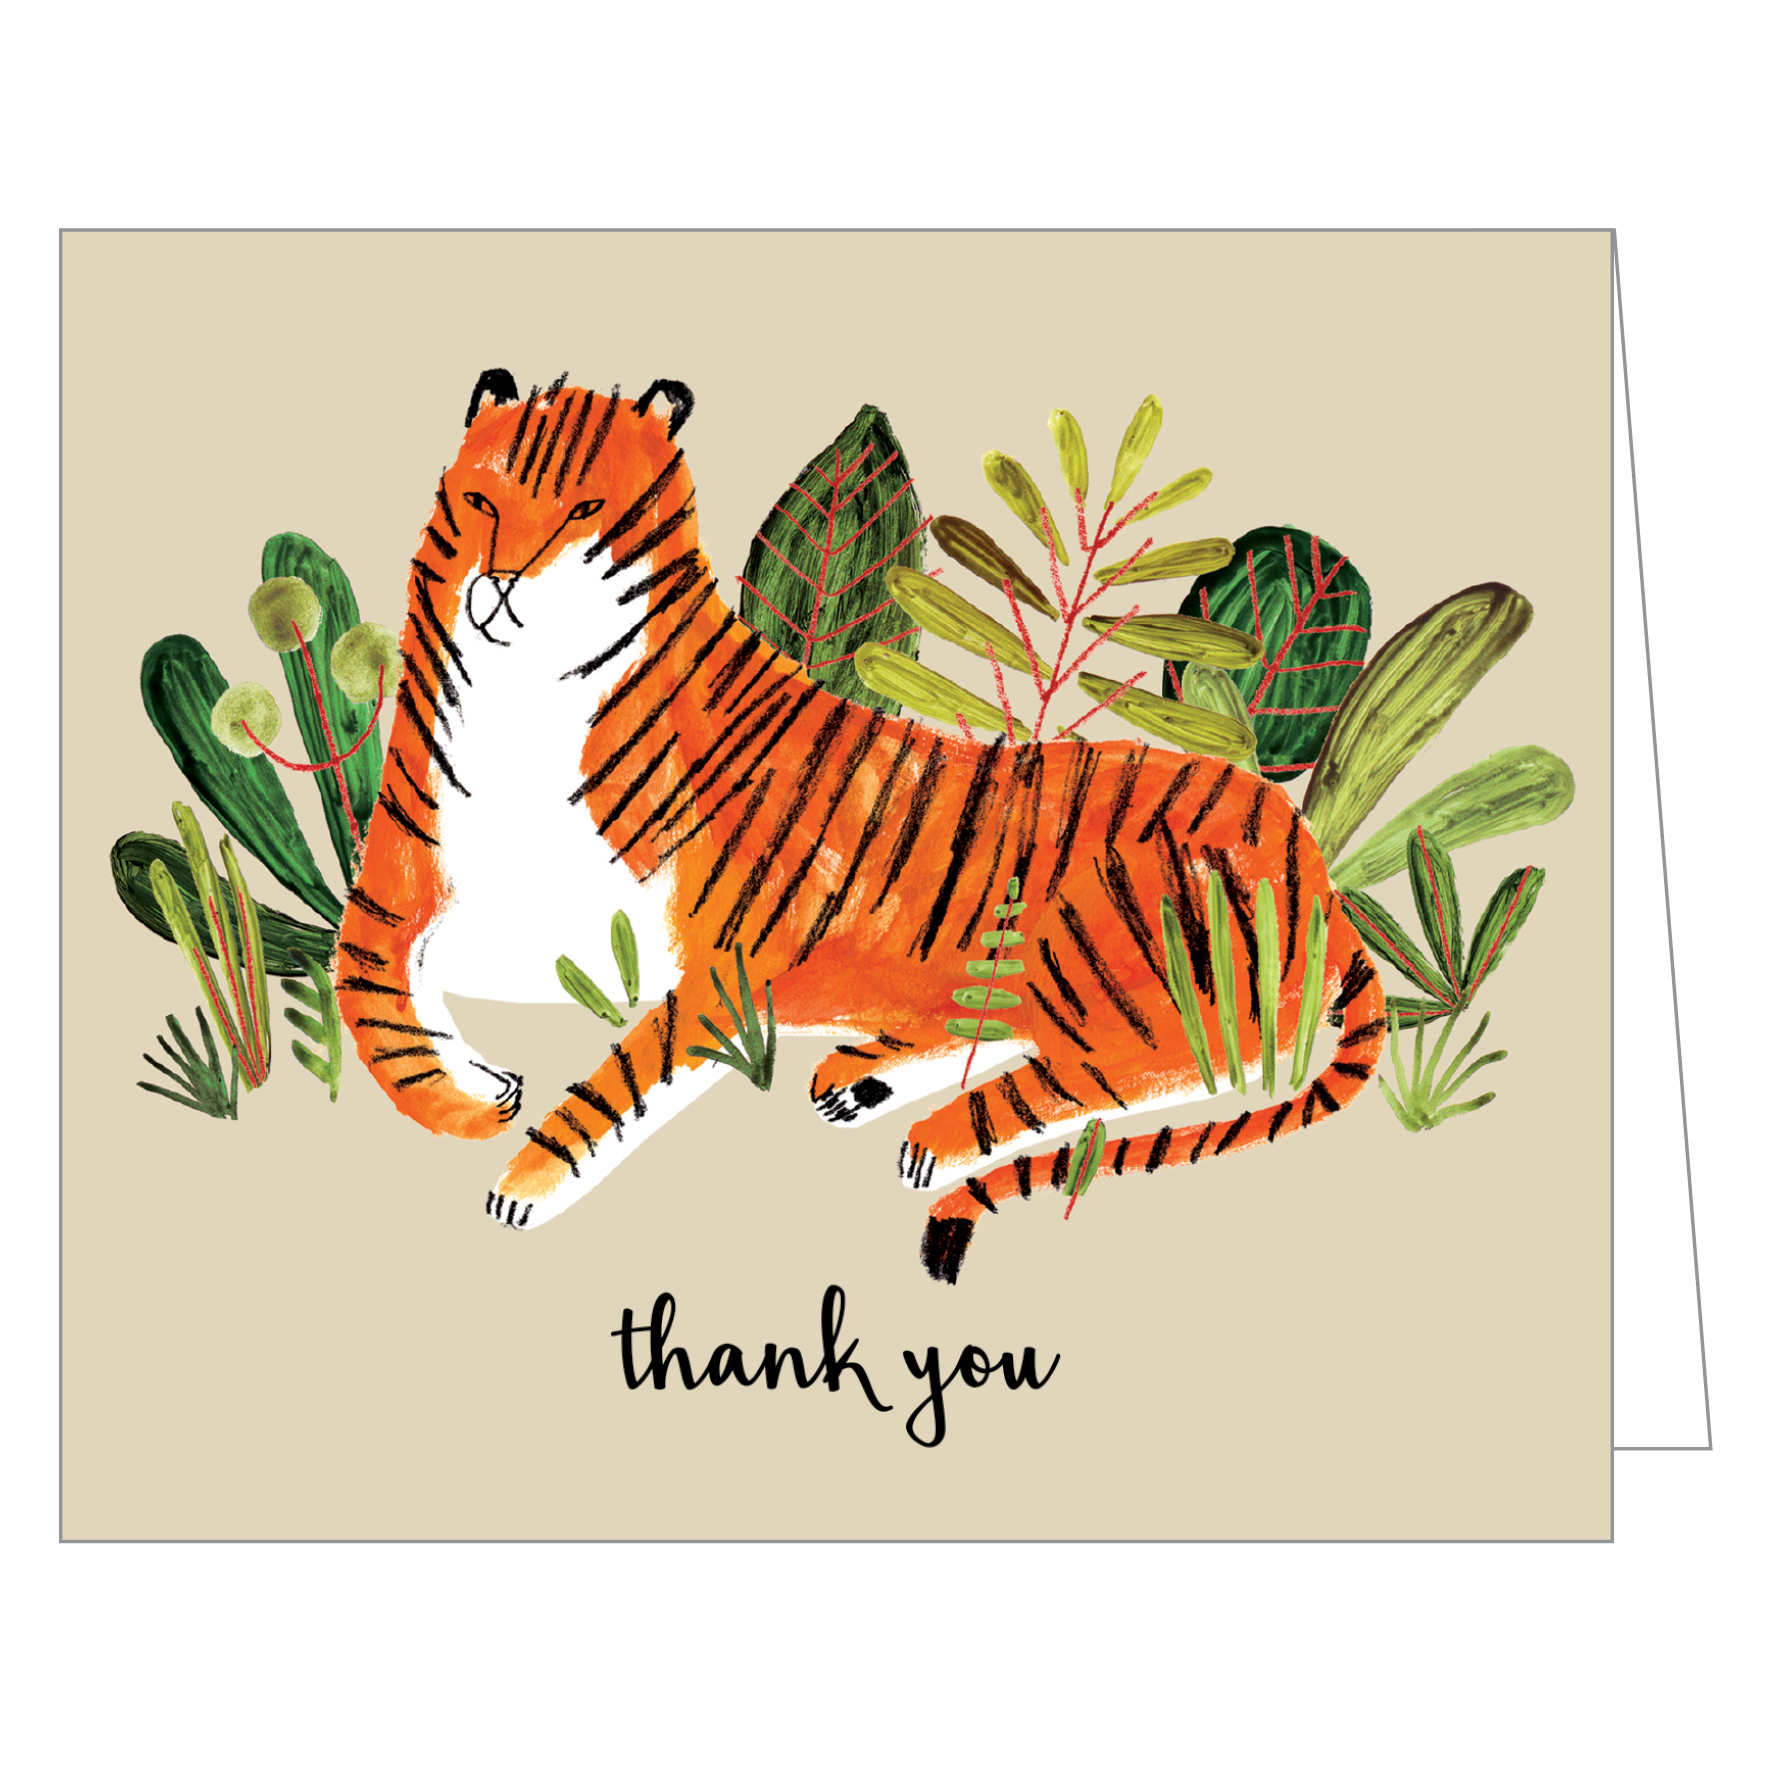 Jen Collins's bold tiger design, on 'thank you' notecard, by teNeues Stationery.